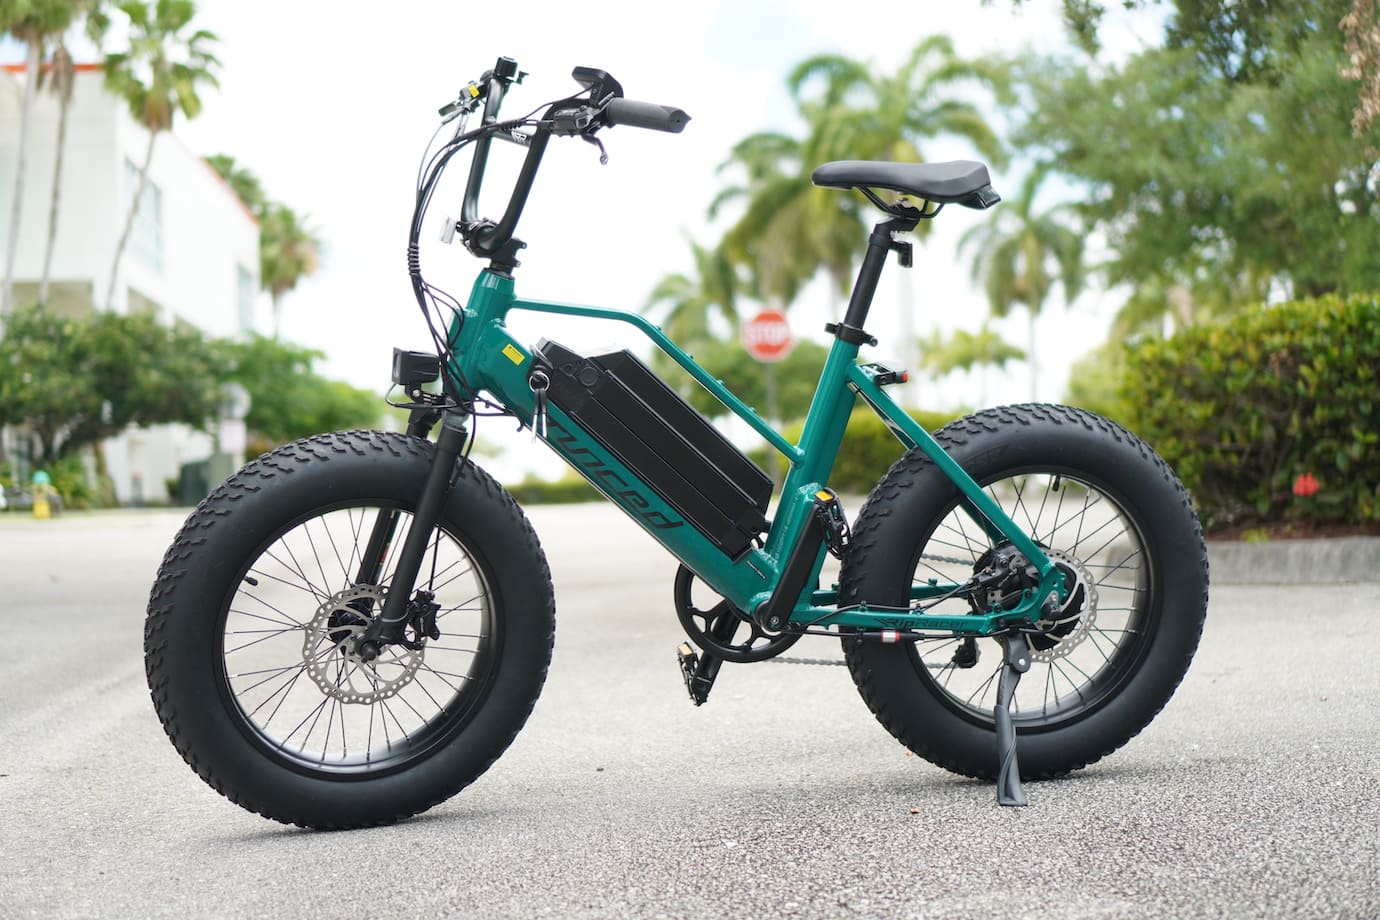 These are the best electric bike Black Friday sales already running